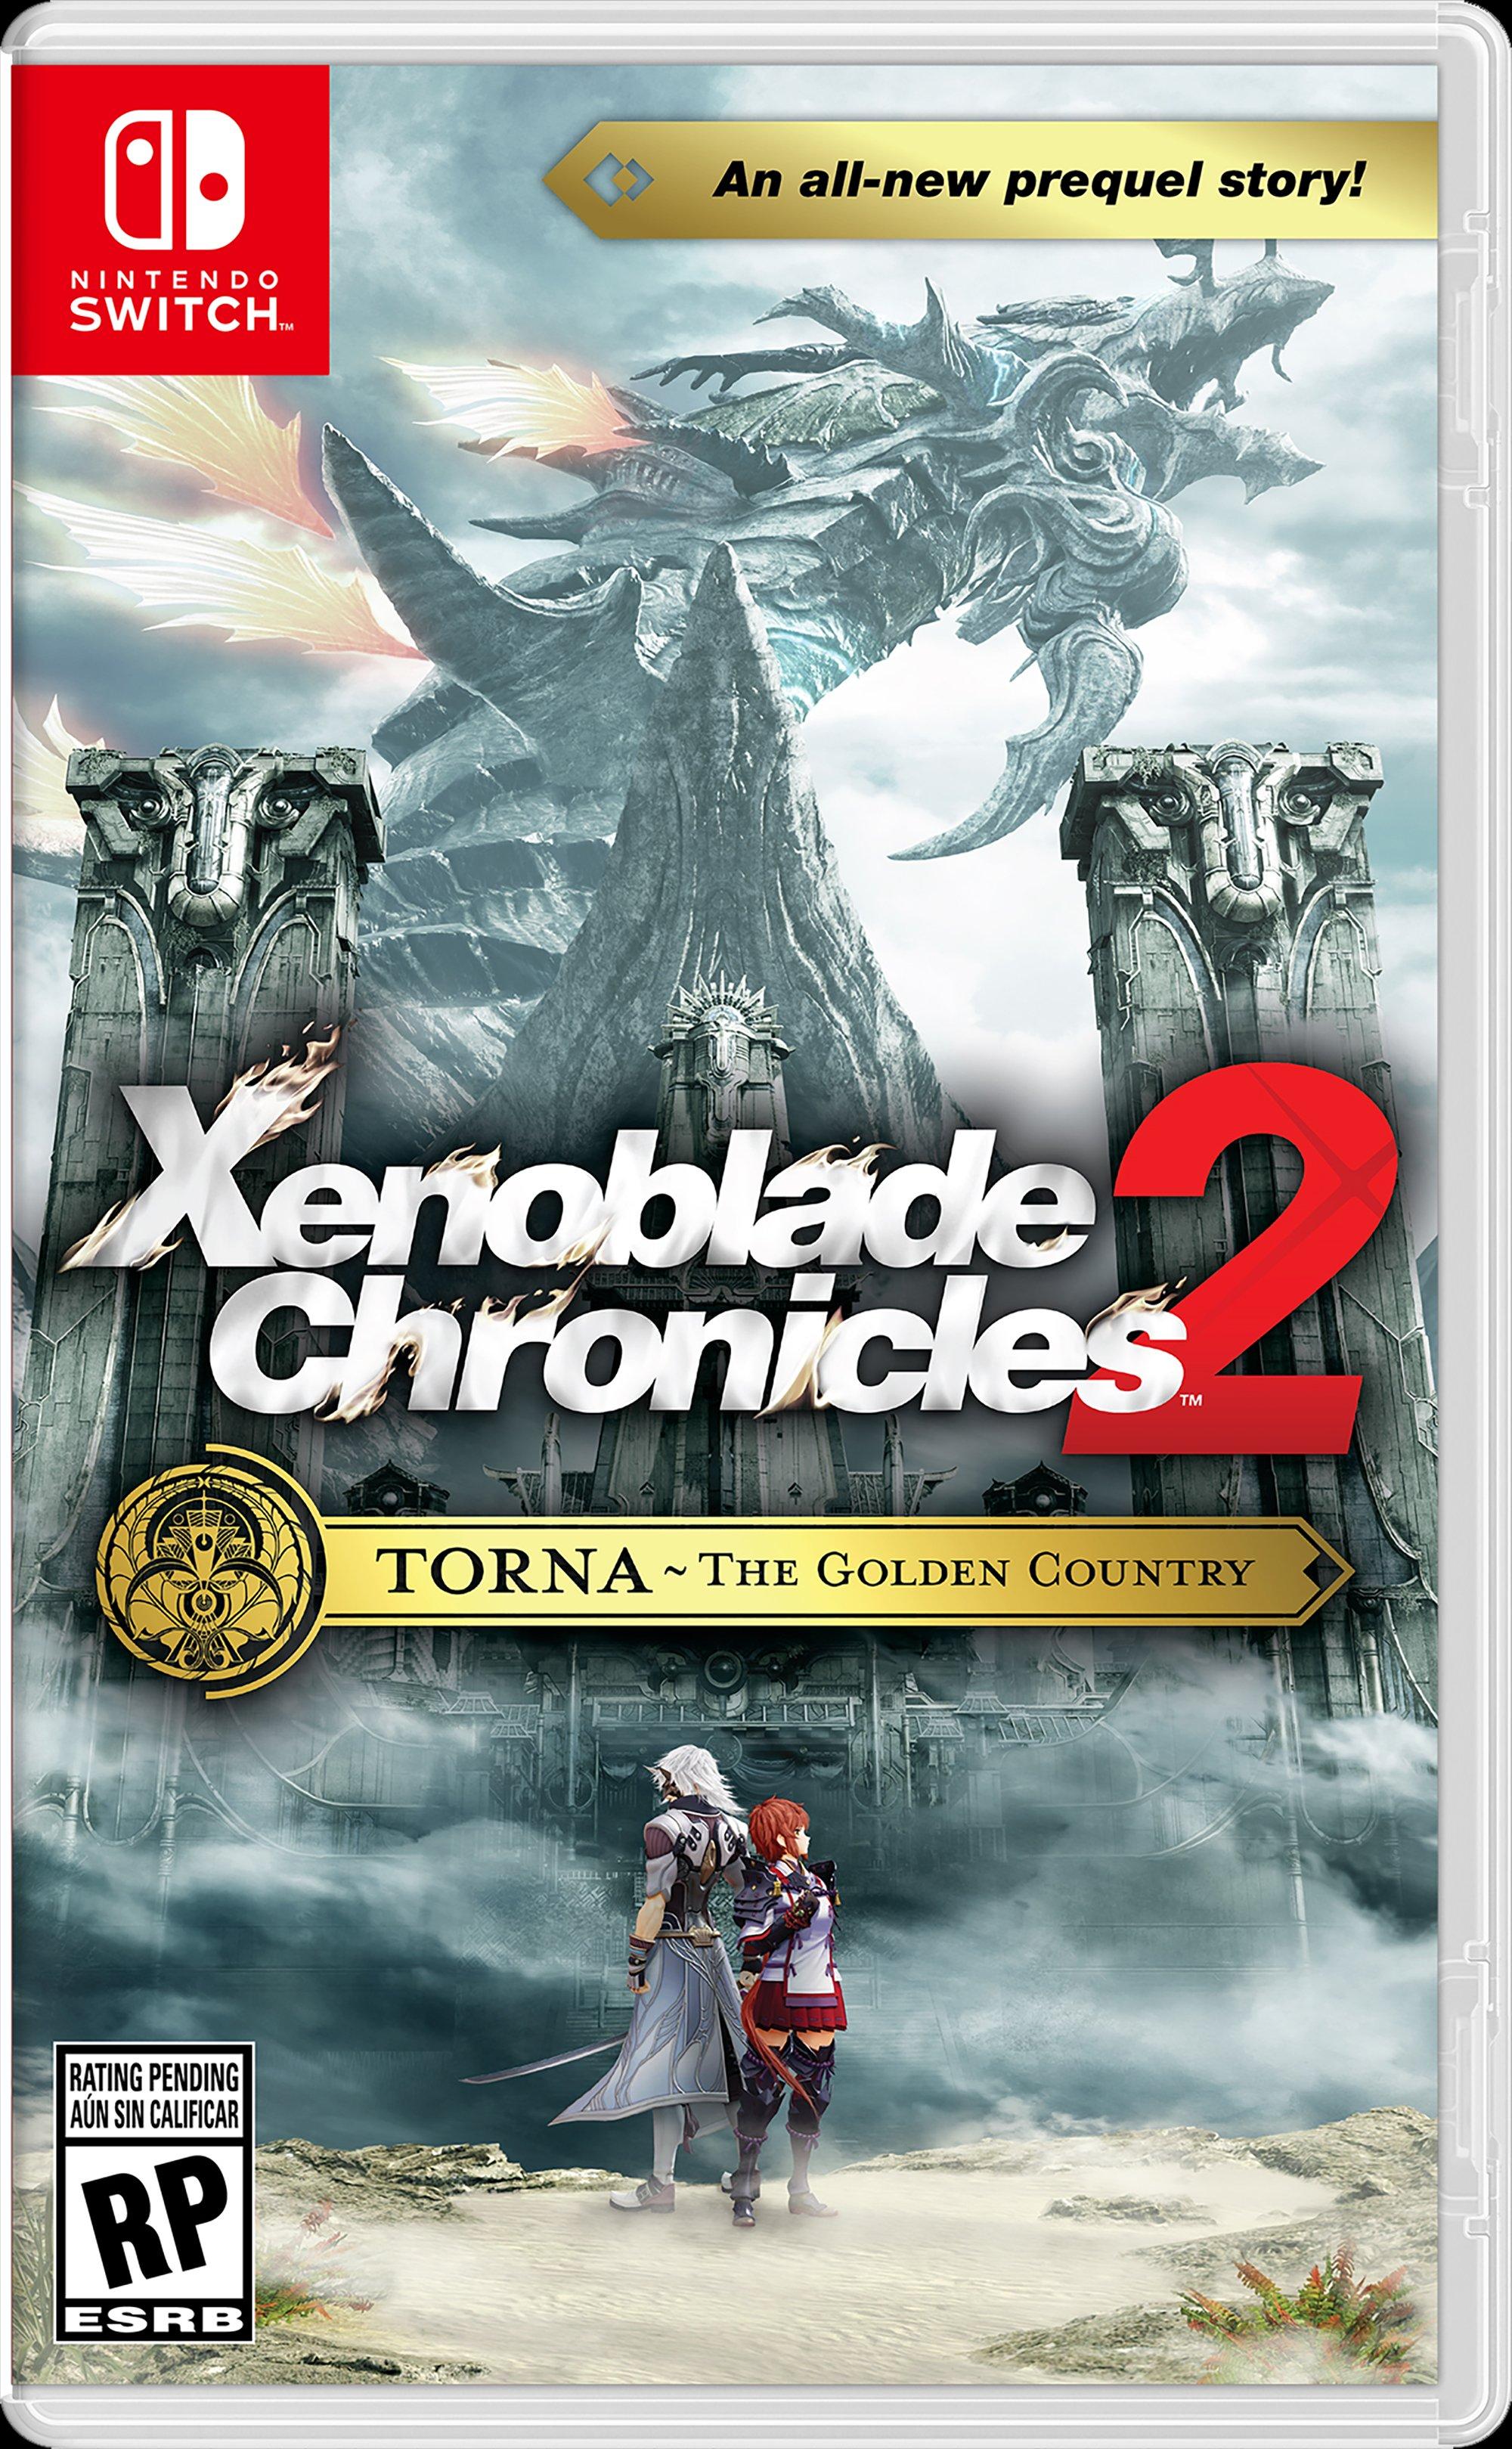 Nintendo Switch Xenoblade Chronicles 2: Torna - The Golden Country